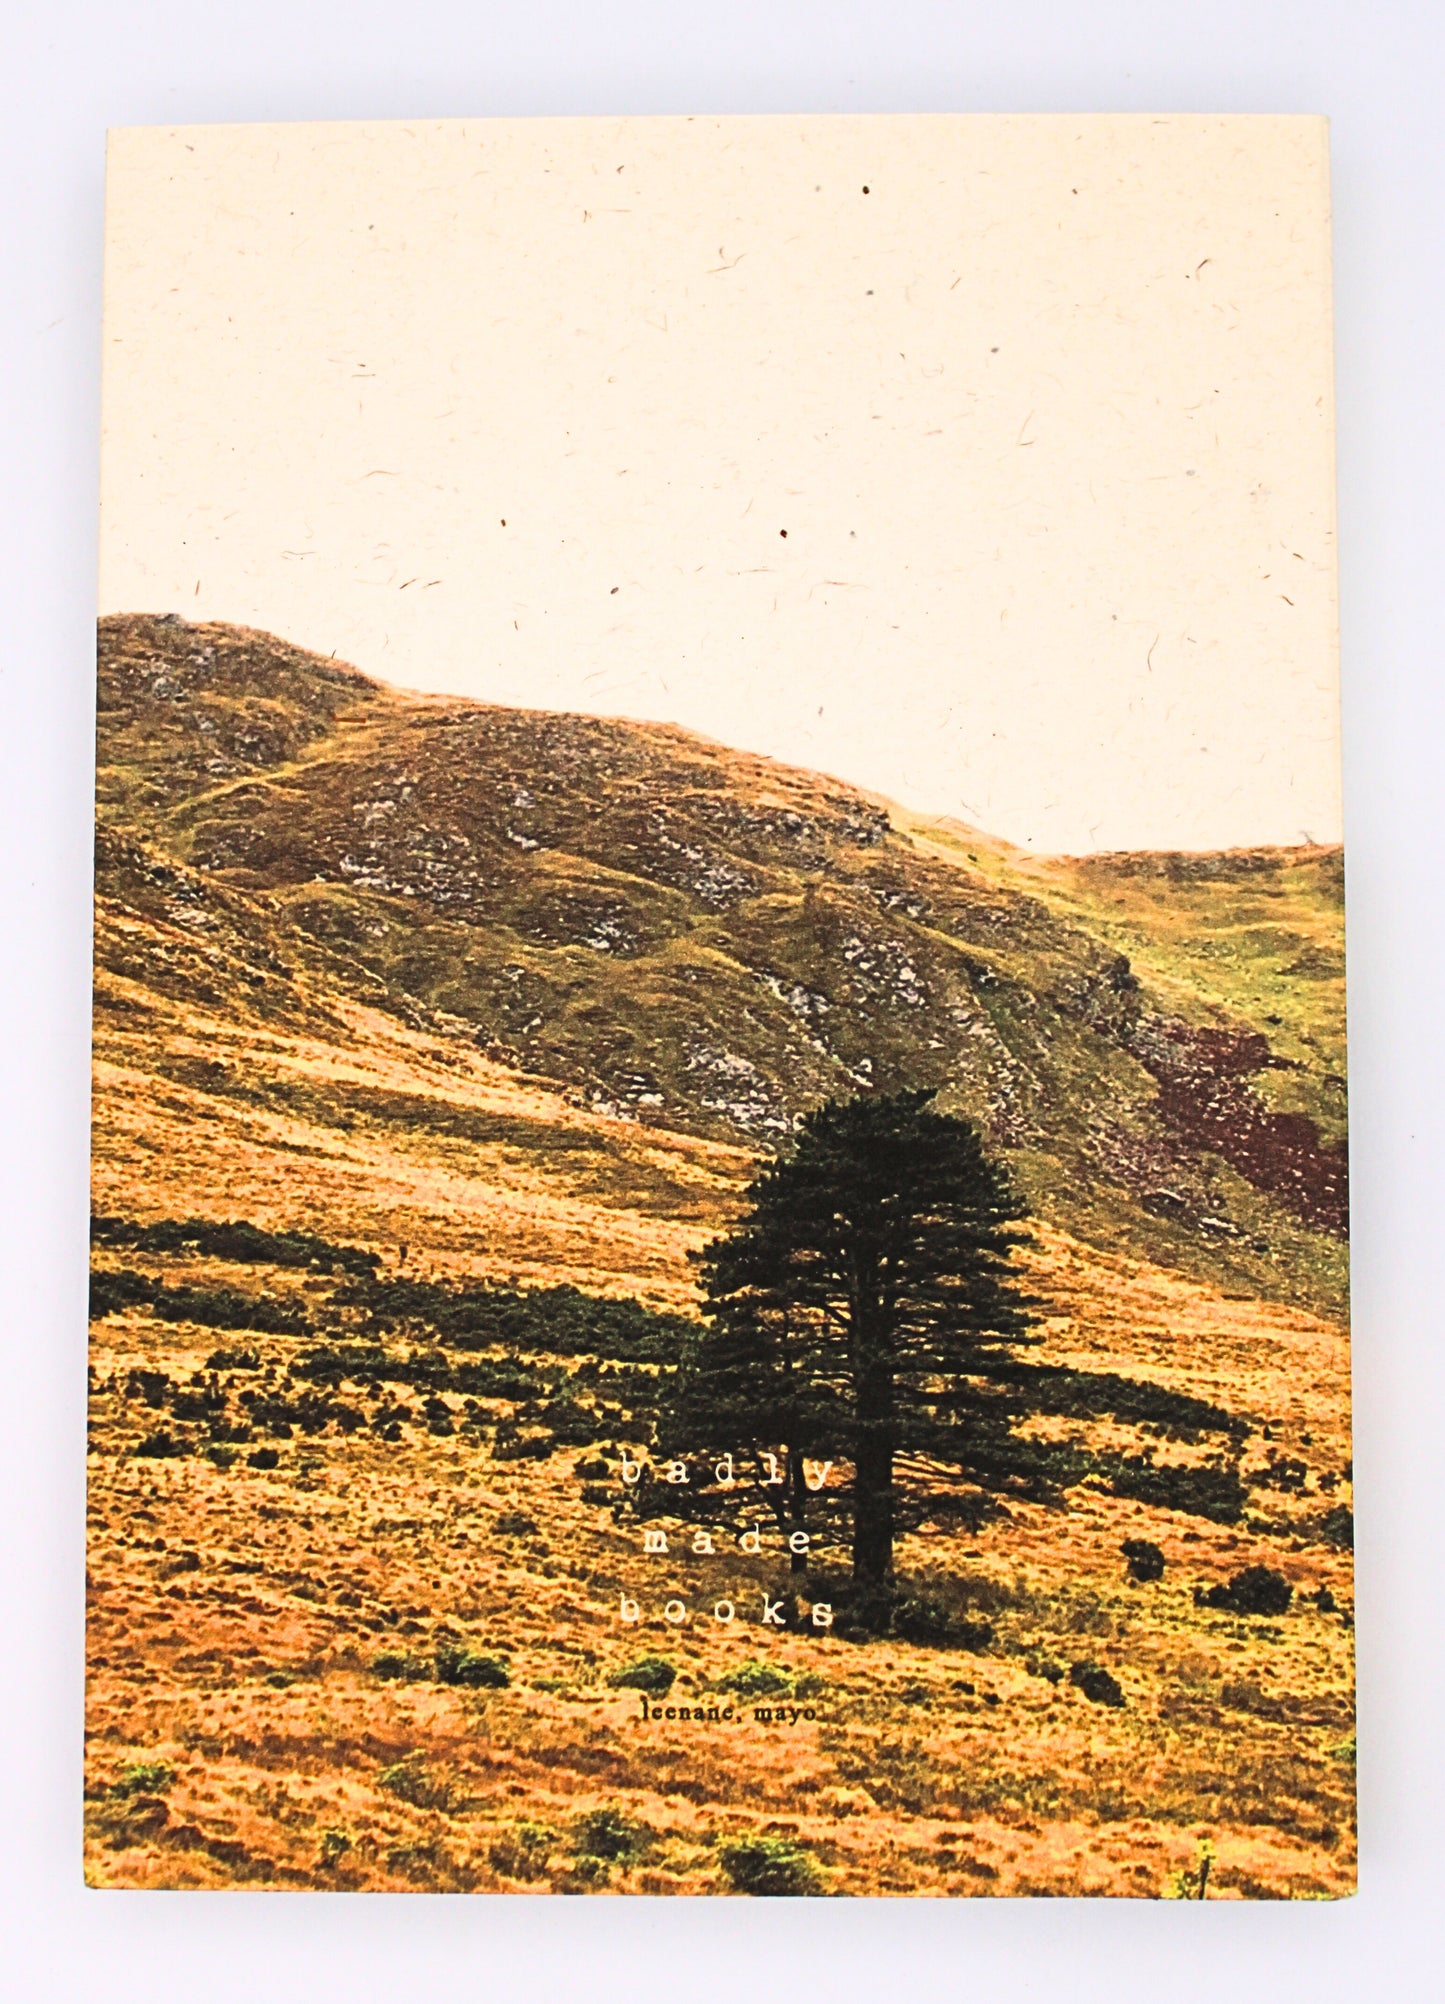 Badly Made Books - A5 Lined Notebook with Leenane Coverith Leenane Cover